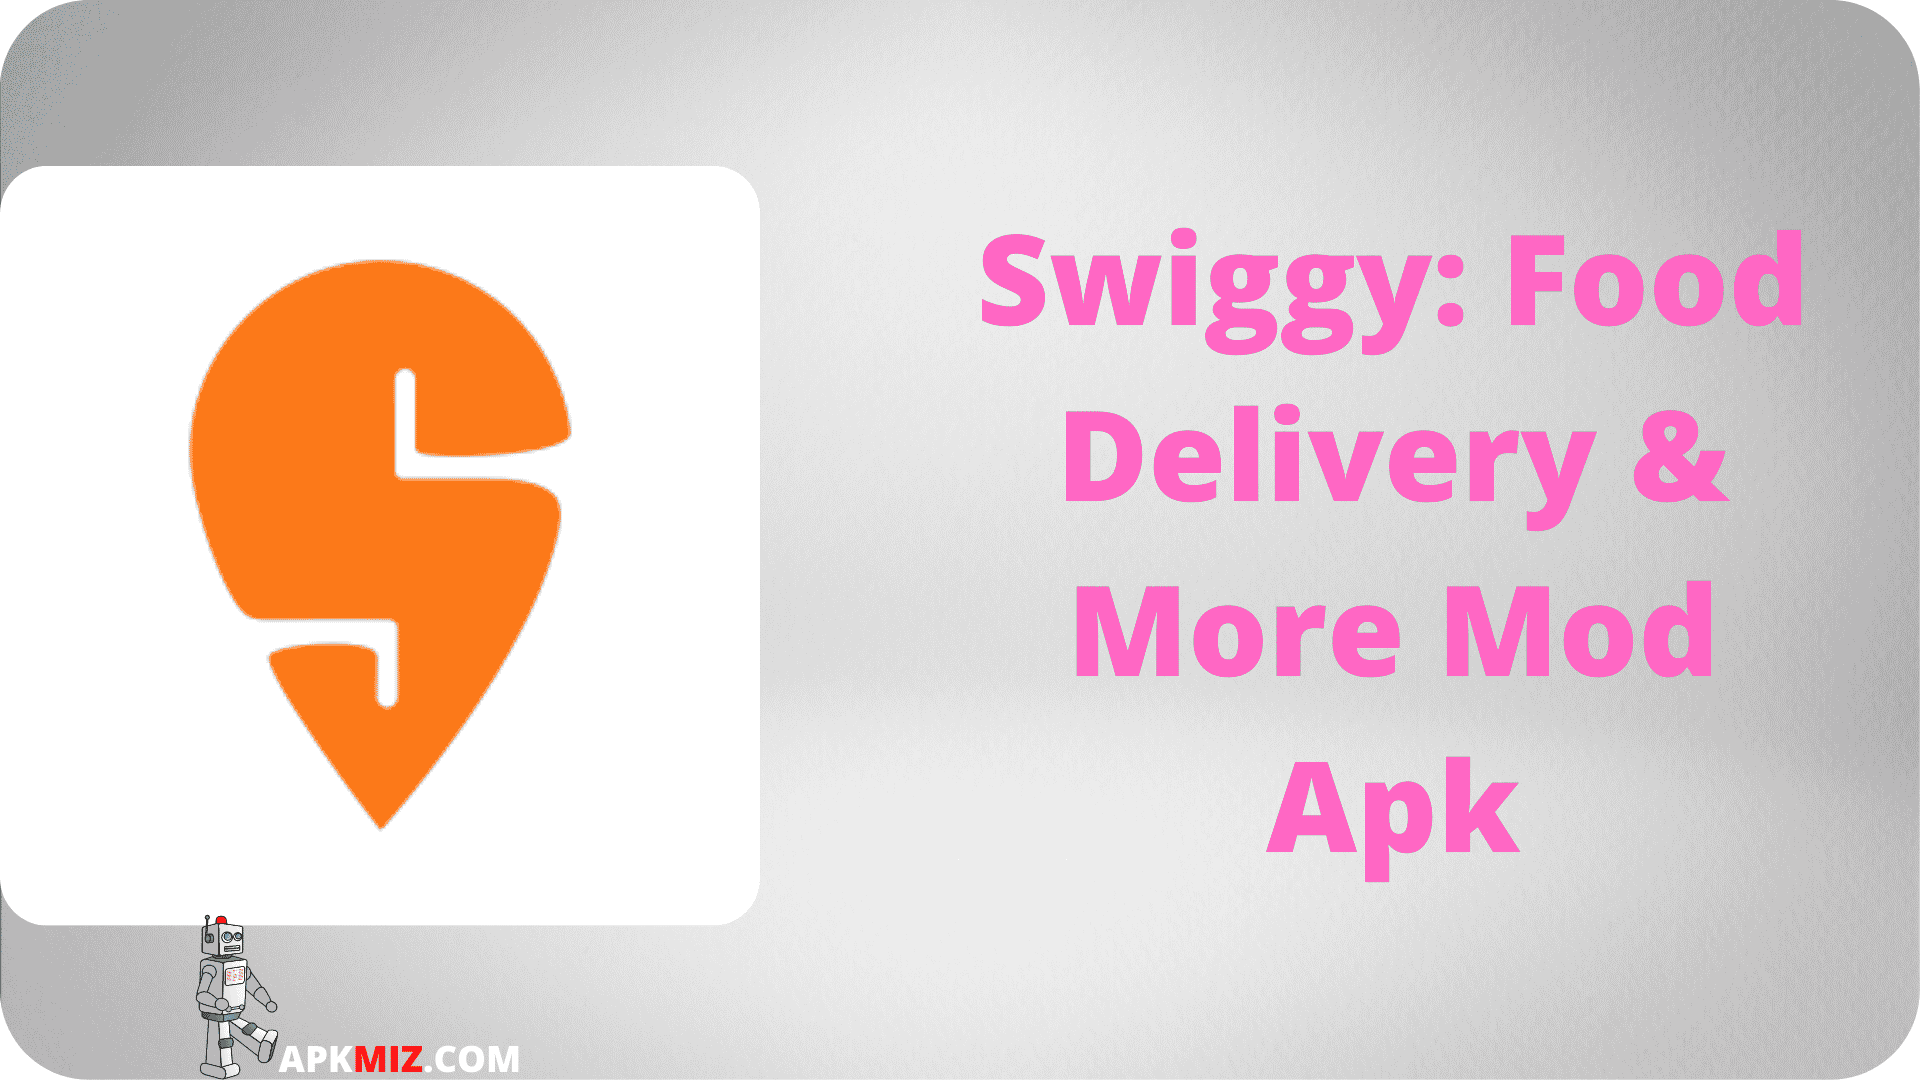 Swiggy: Food Delivery & More‏ Mod Apk‏